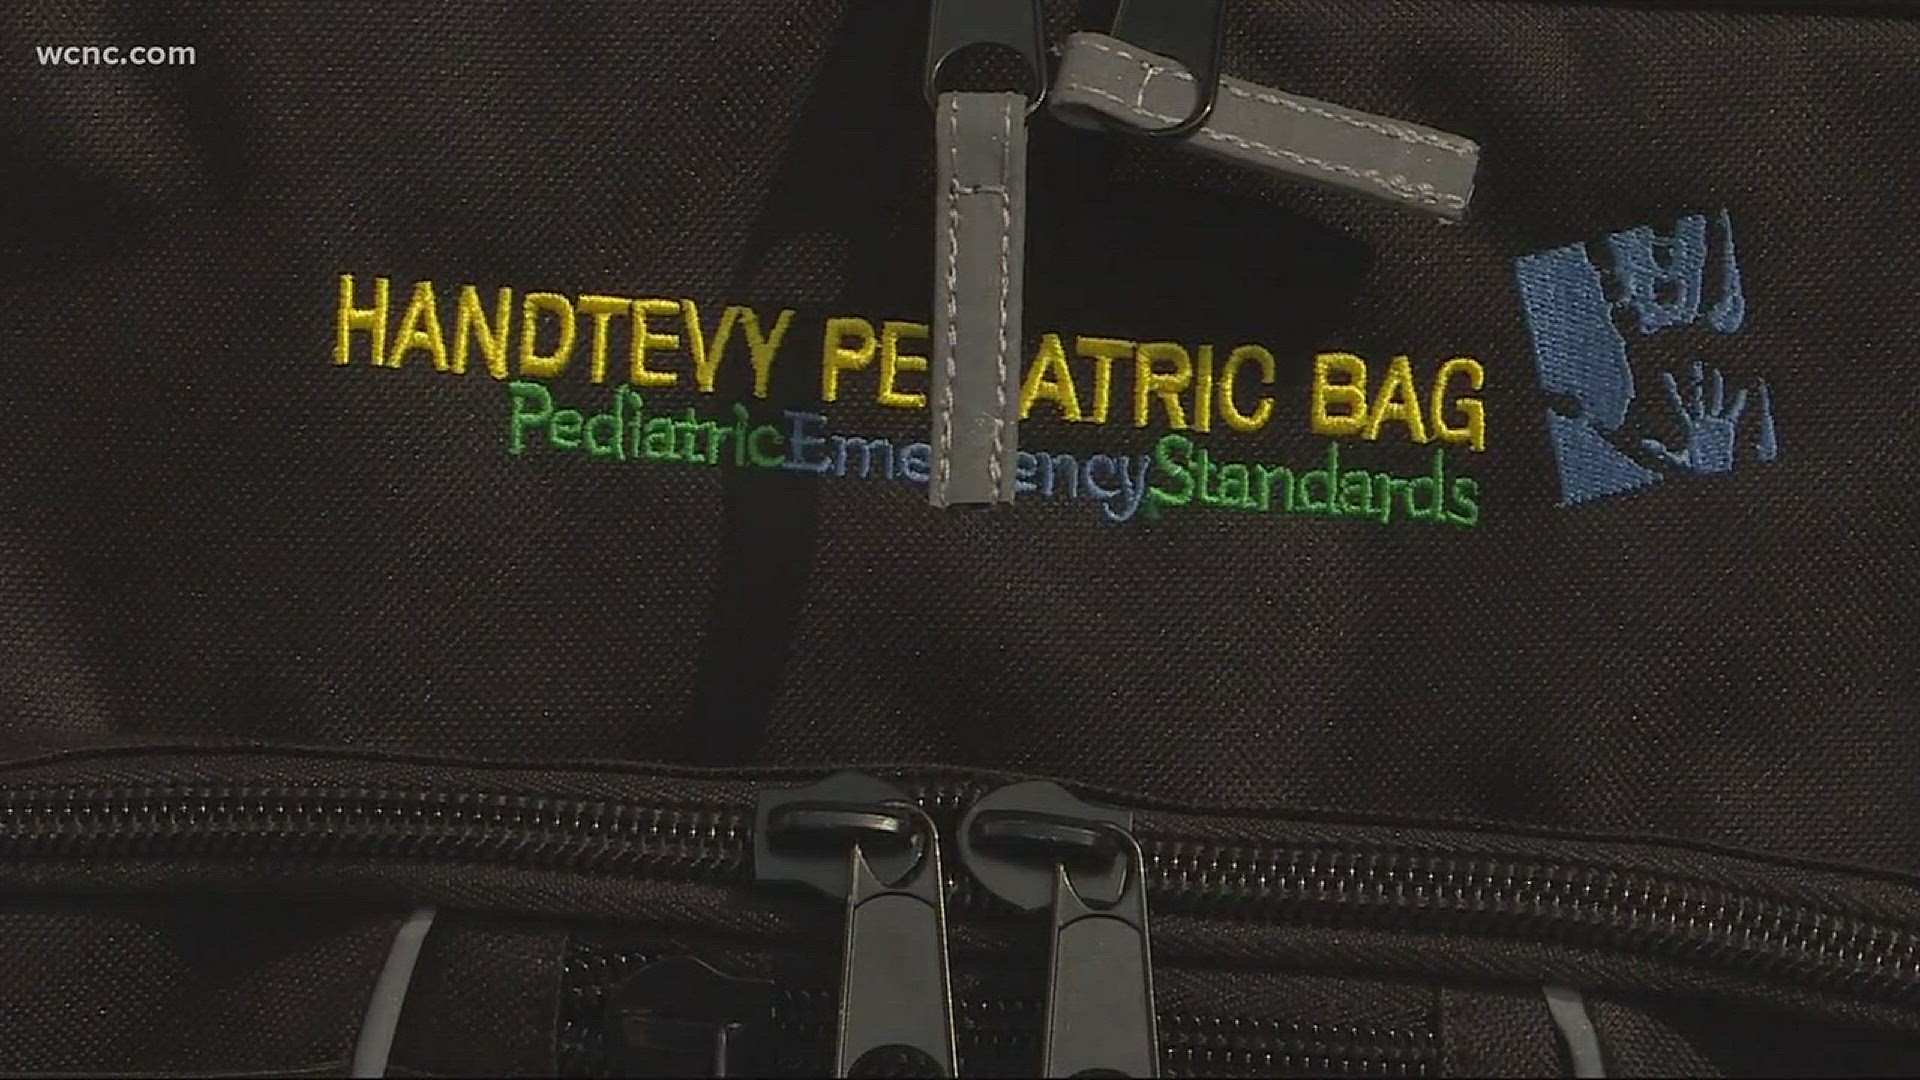 First responders are being trained to use the new life saving kits